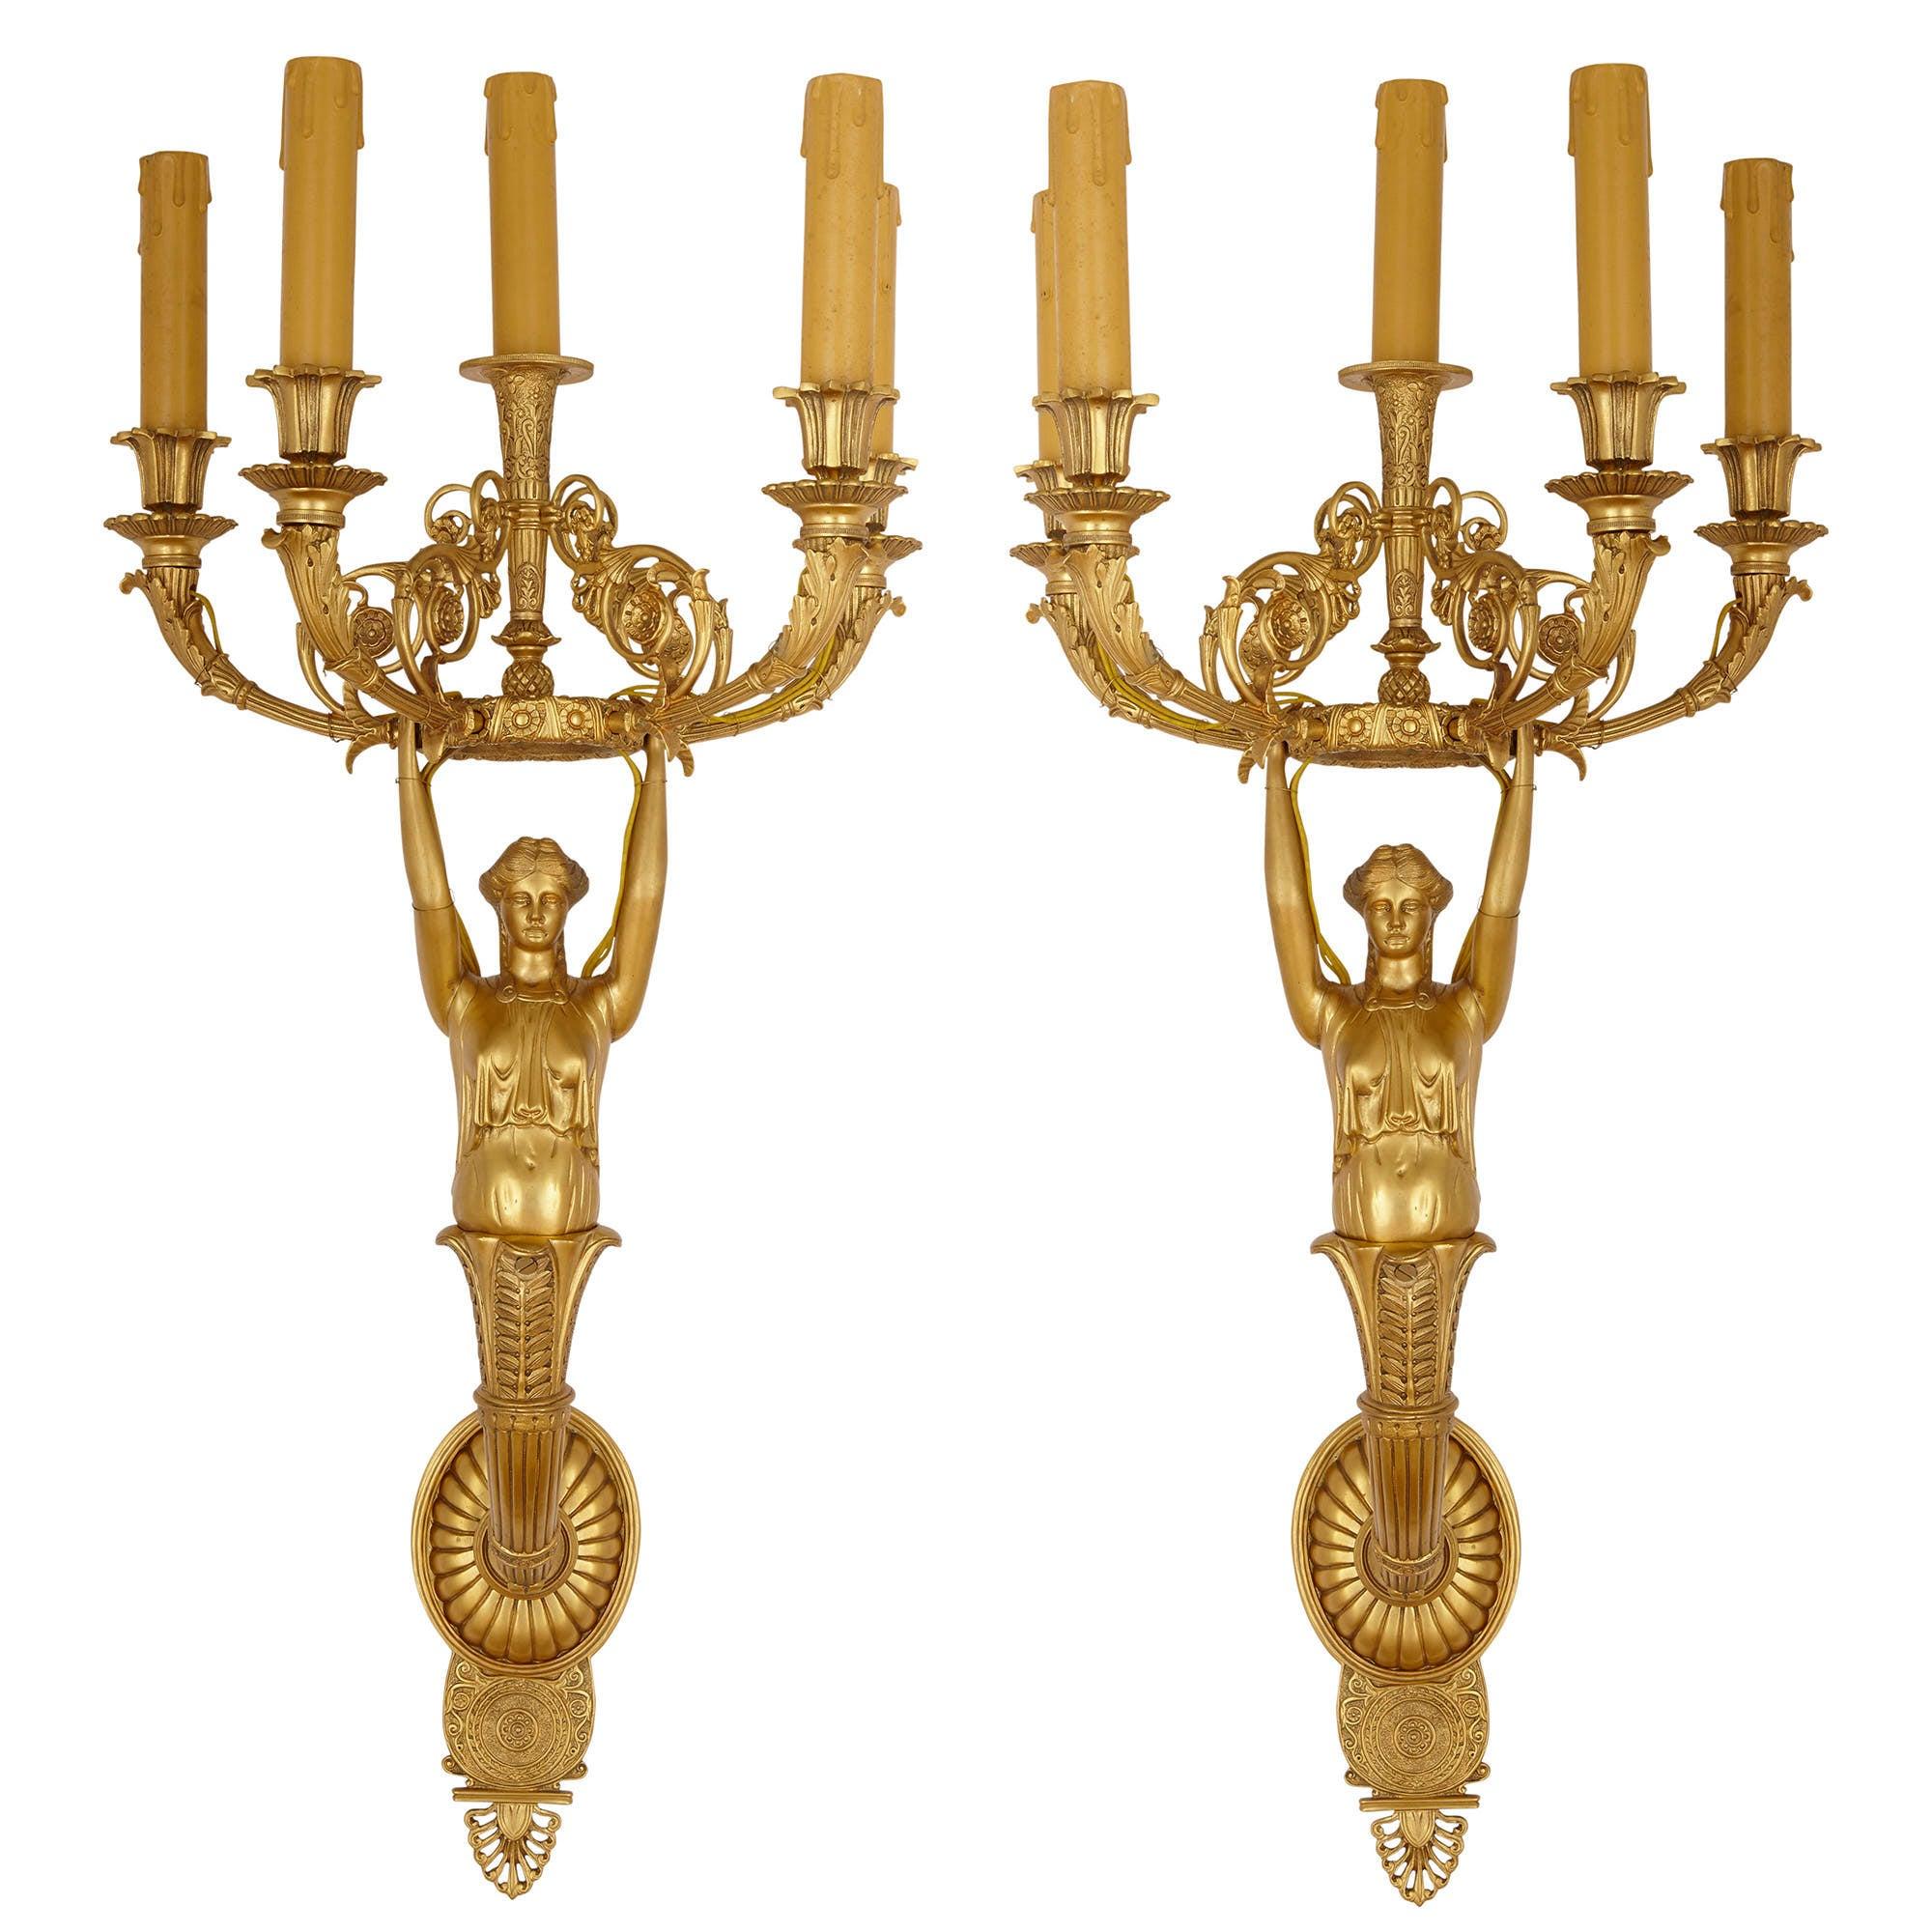 Pair of French Empire Style Gilt Bronze Sconces